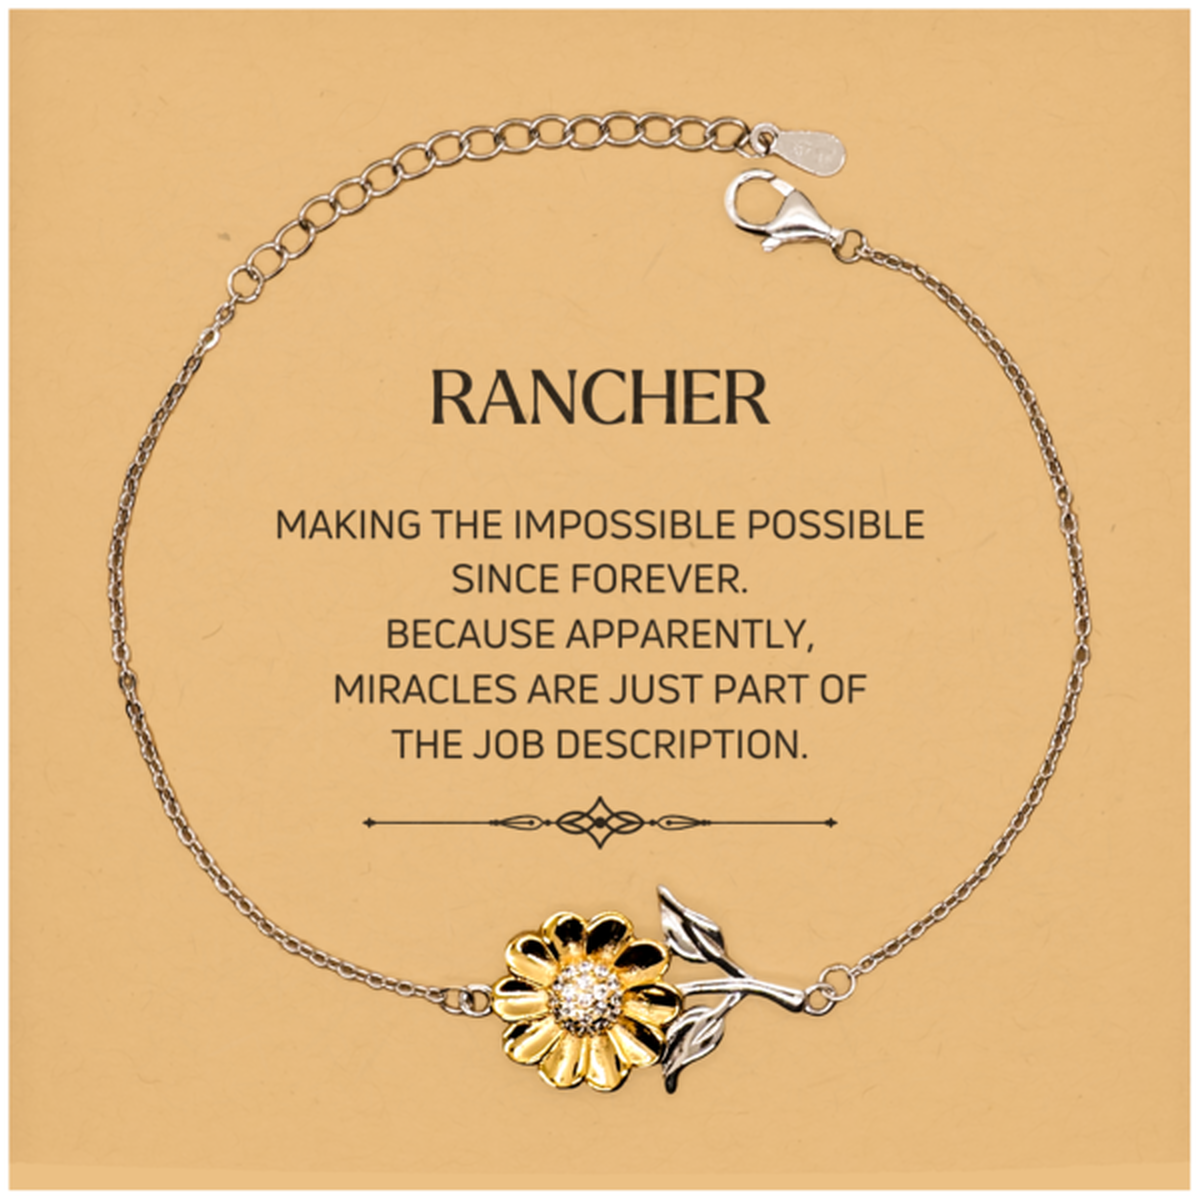 Funny Rancher Gifts, Miracles are just part of the job description, Inspirational Birthday Christmas Sunflower Bracelet For Rancher, Men, Women, Coworkers, Friends, Boss